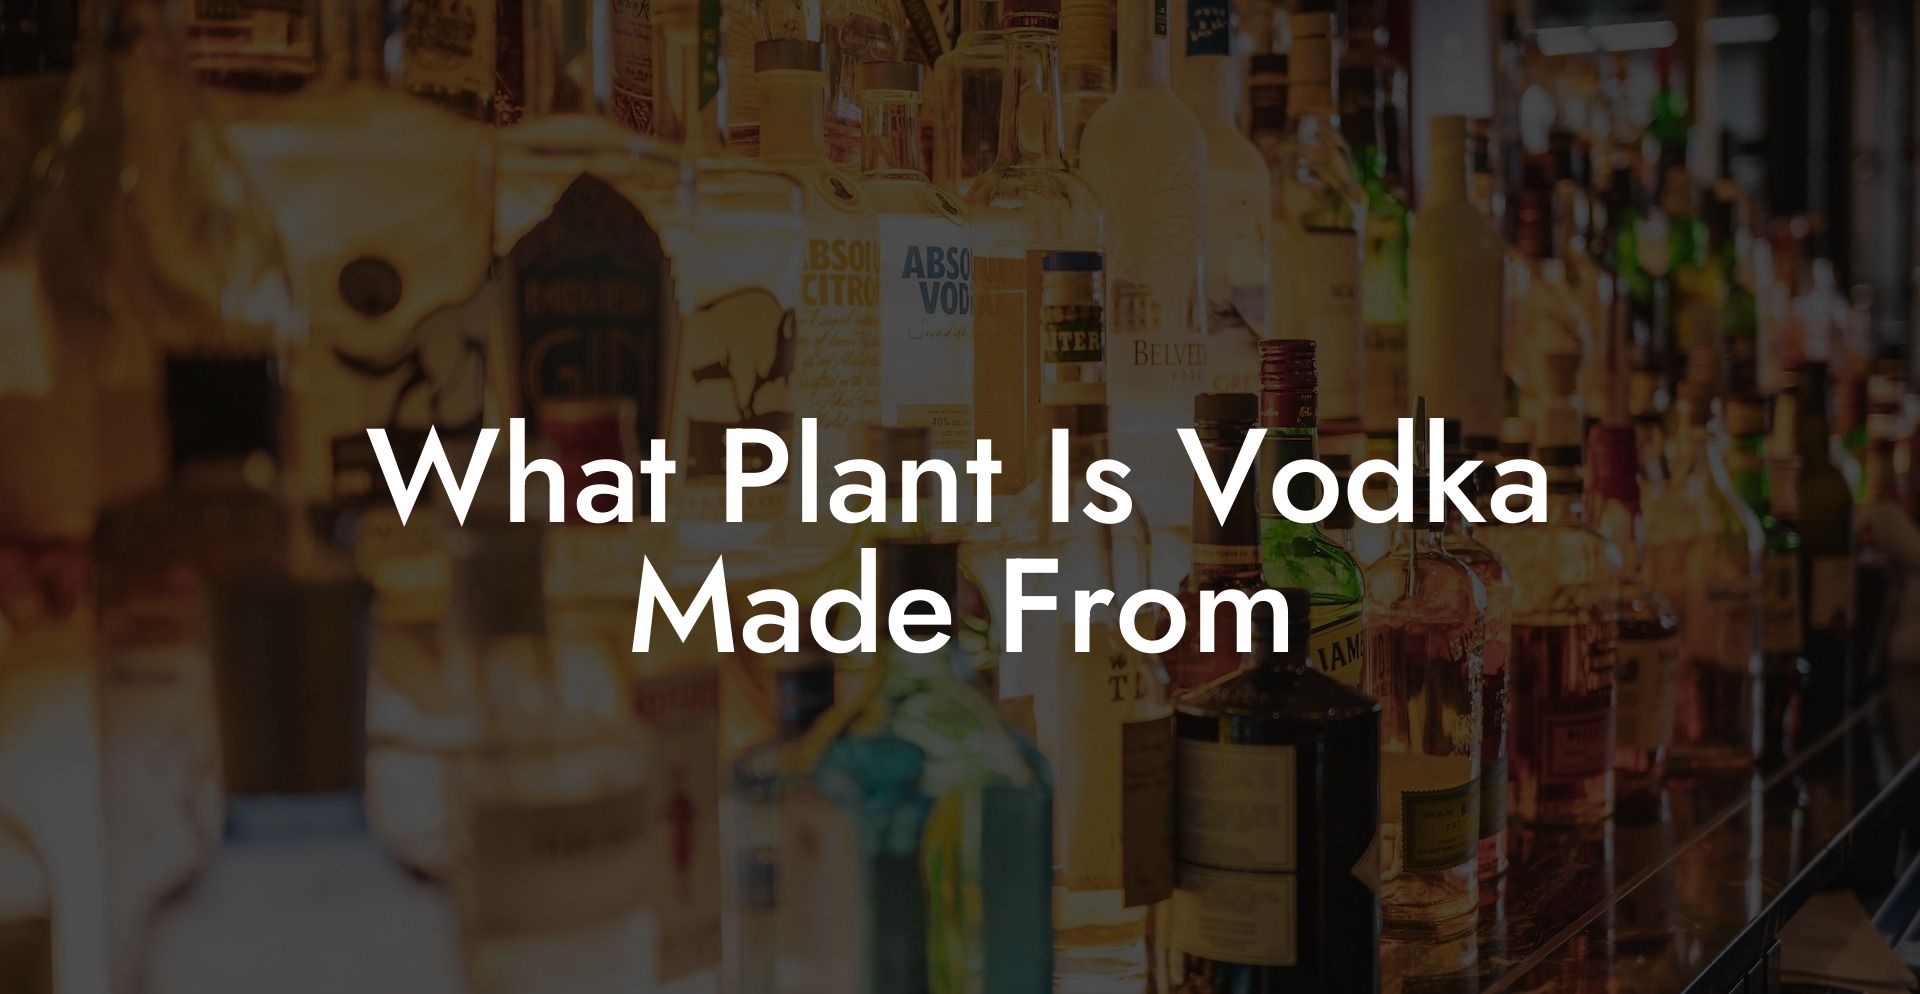 What Plant Is Vodka Made From